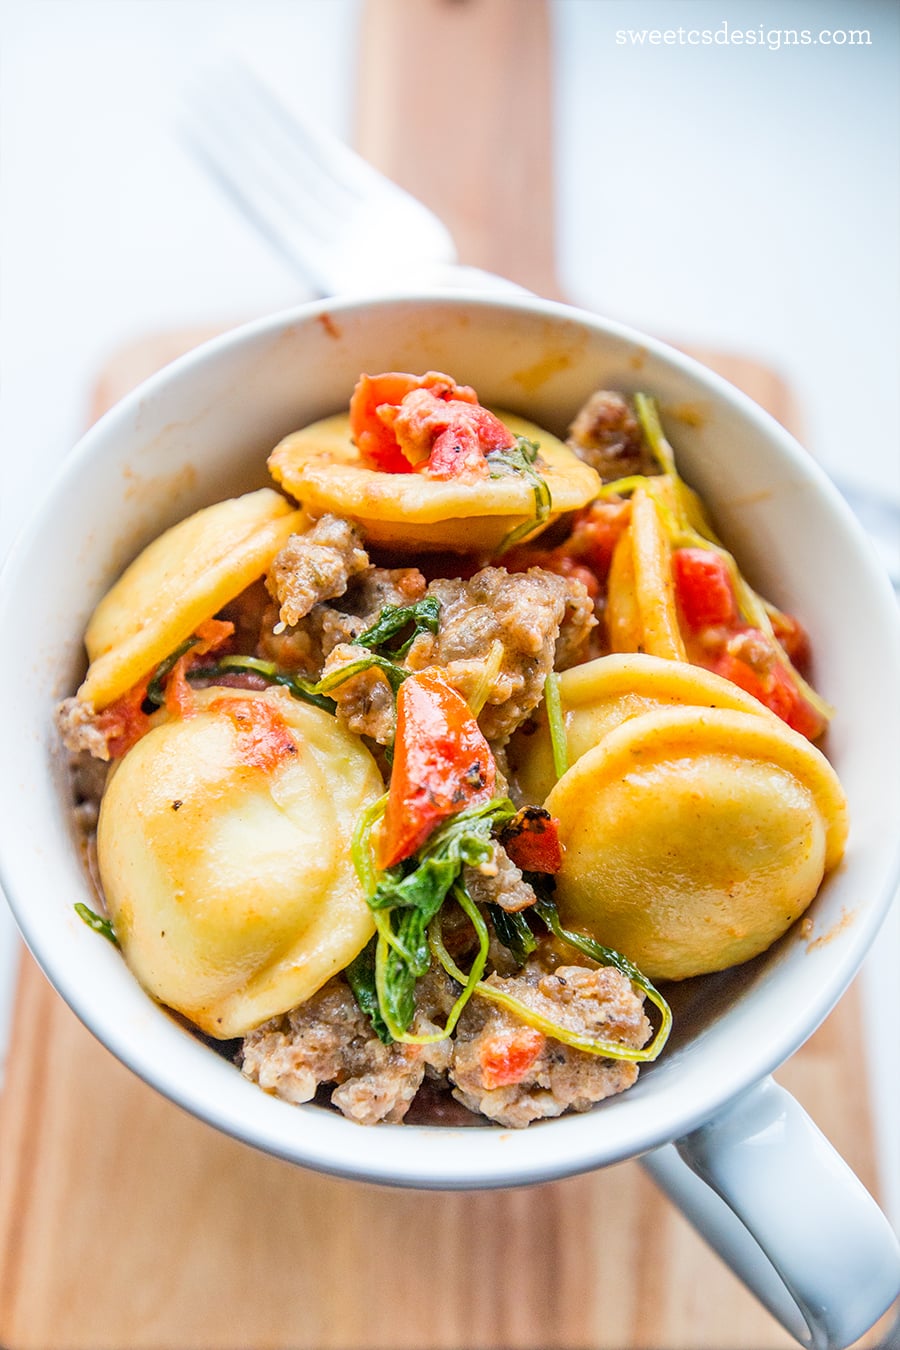 This ravioli and sausage skillet is so delicious- my family devours it!